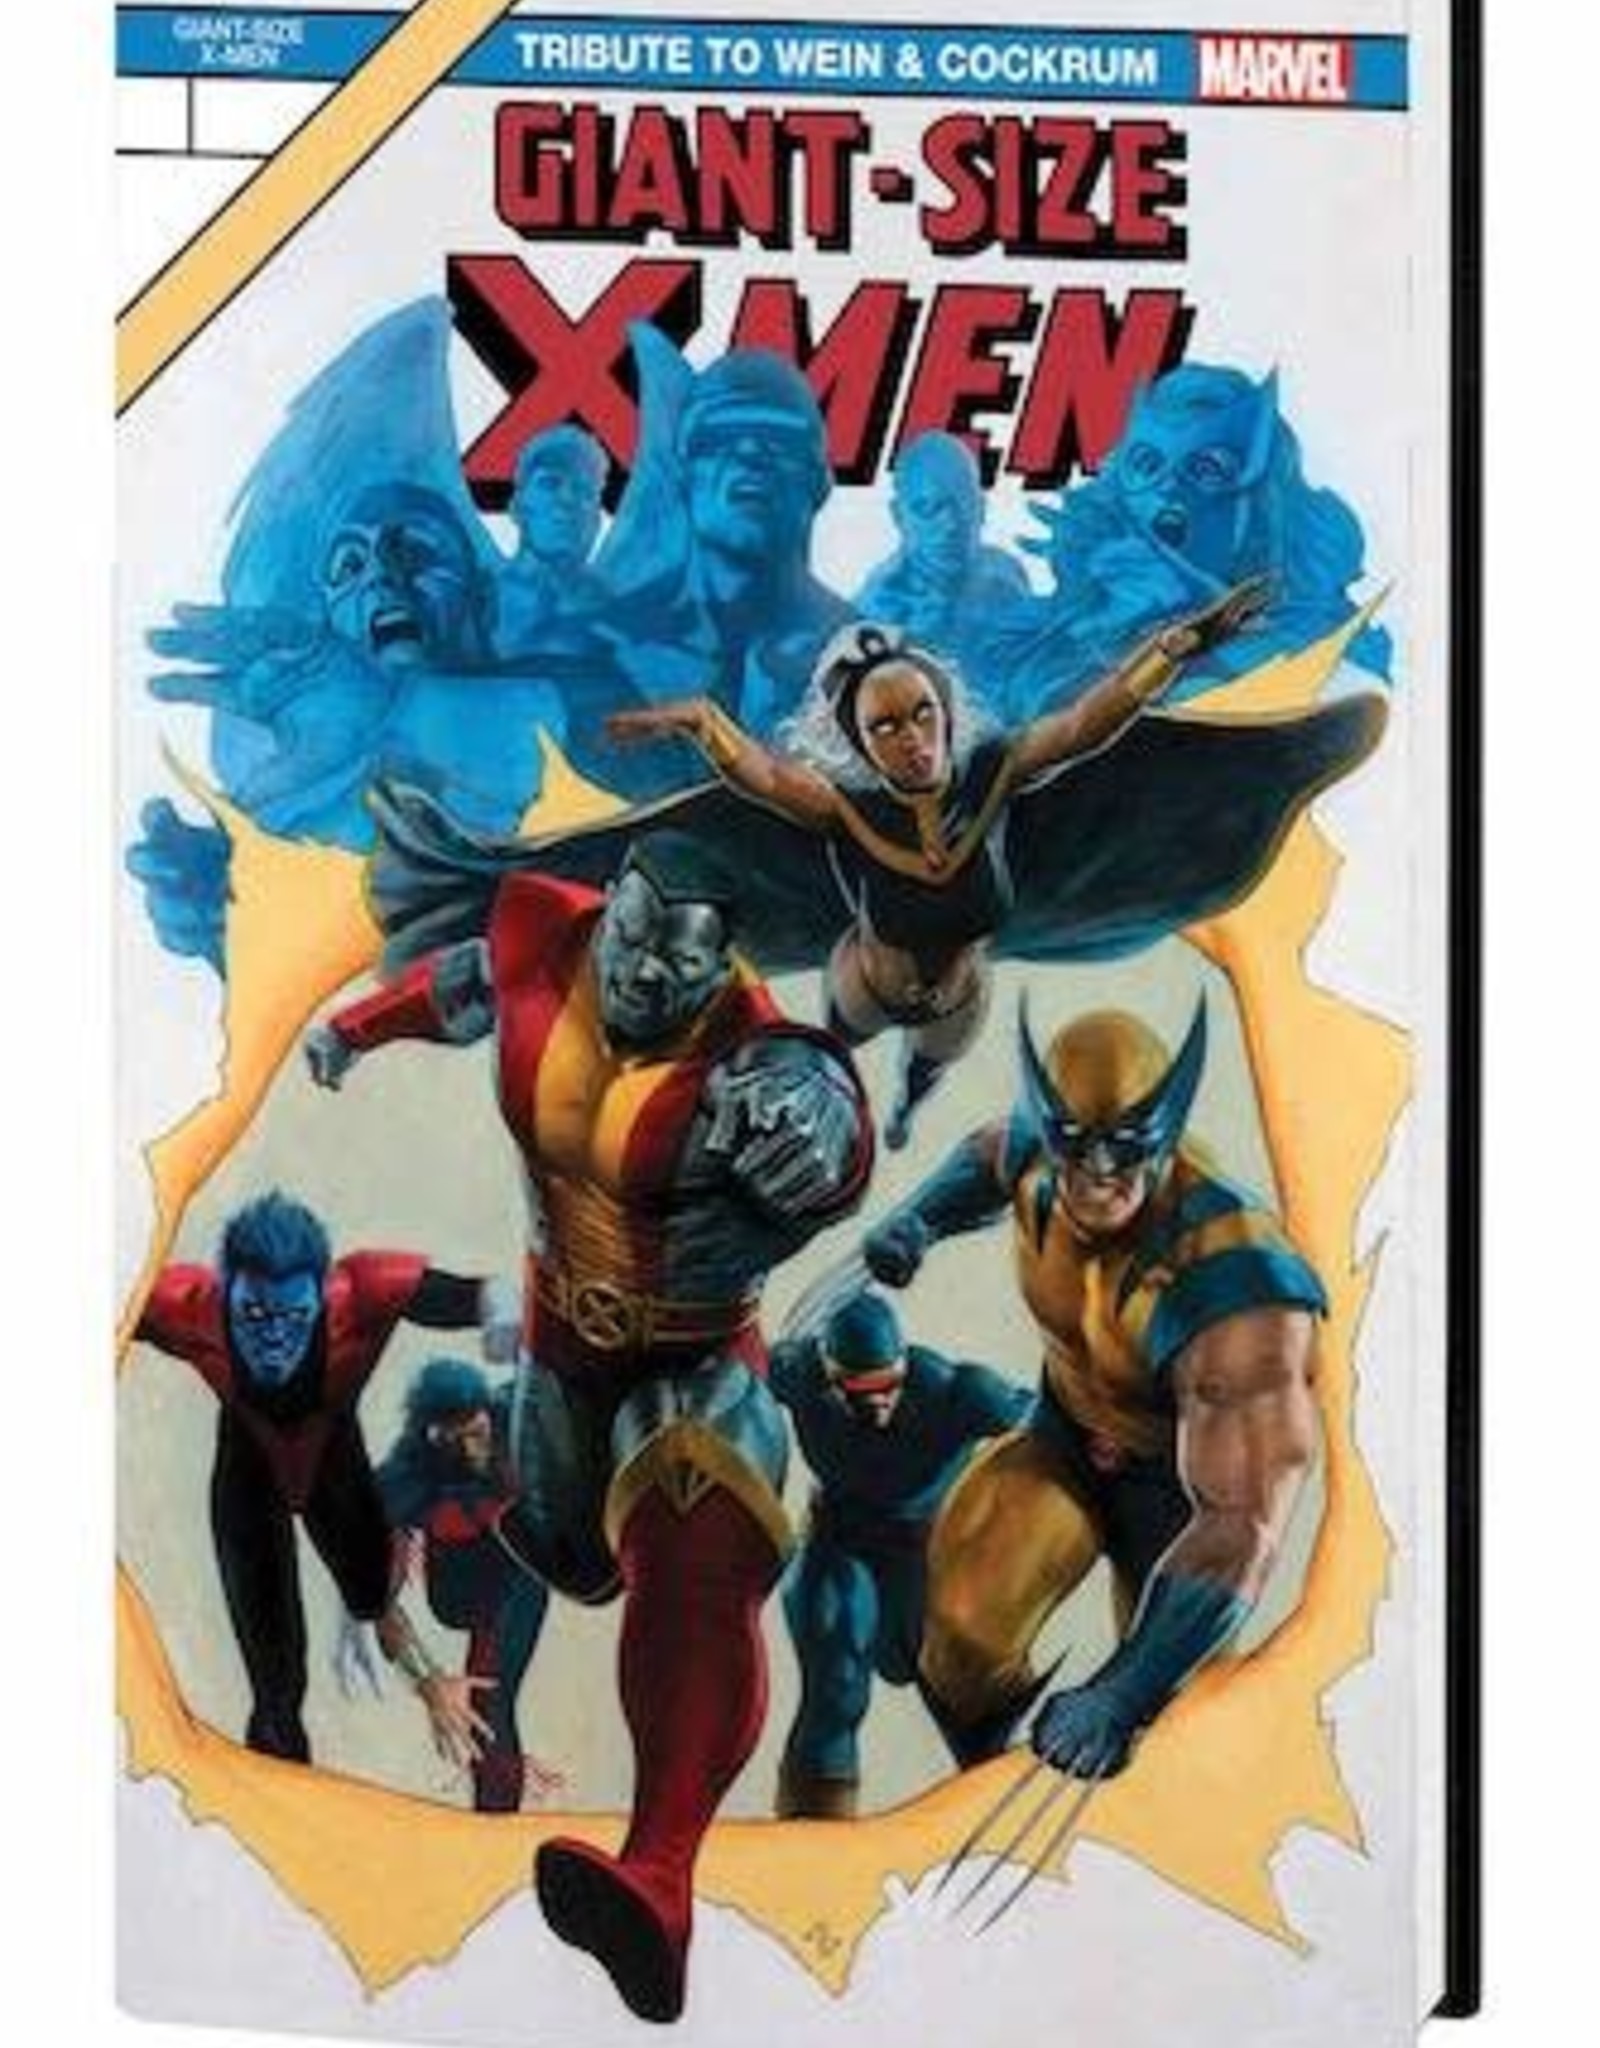 Marvel Comics GIant-Size X-Men Tribute Wein Cockrum Gallery Edition HC